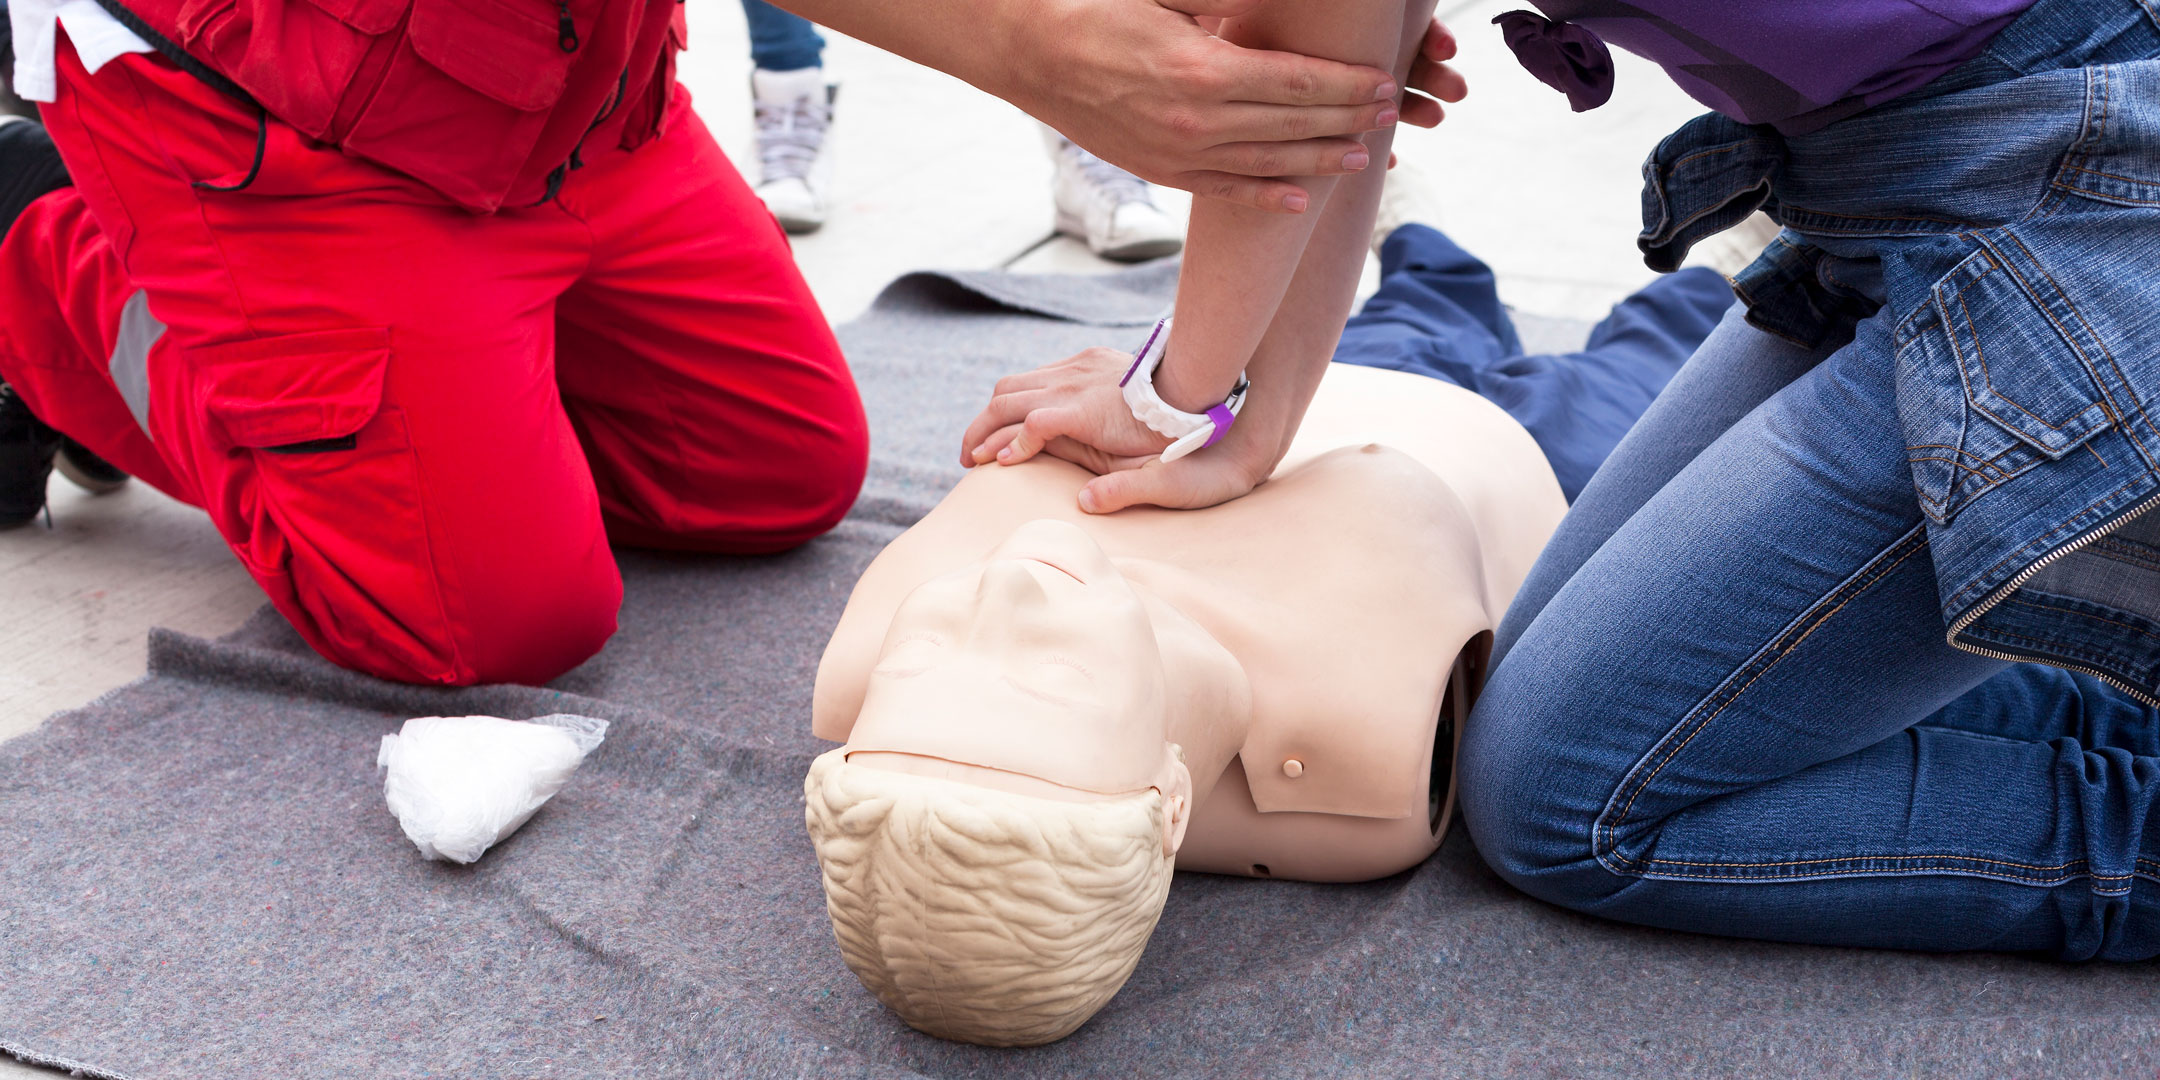 Close-up of CPR instructor helping a student perform CPR on a manikin